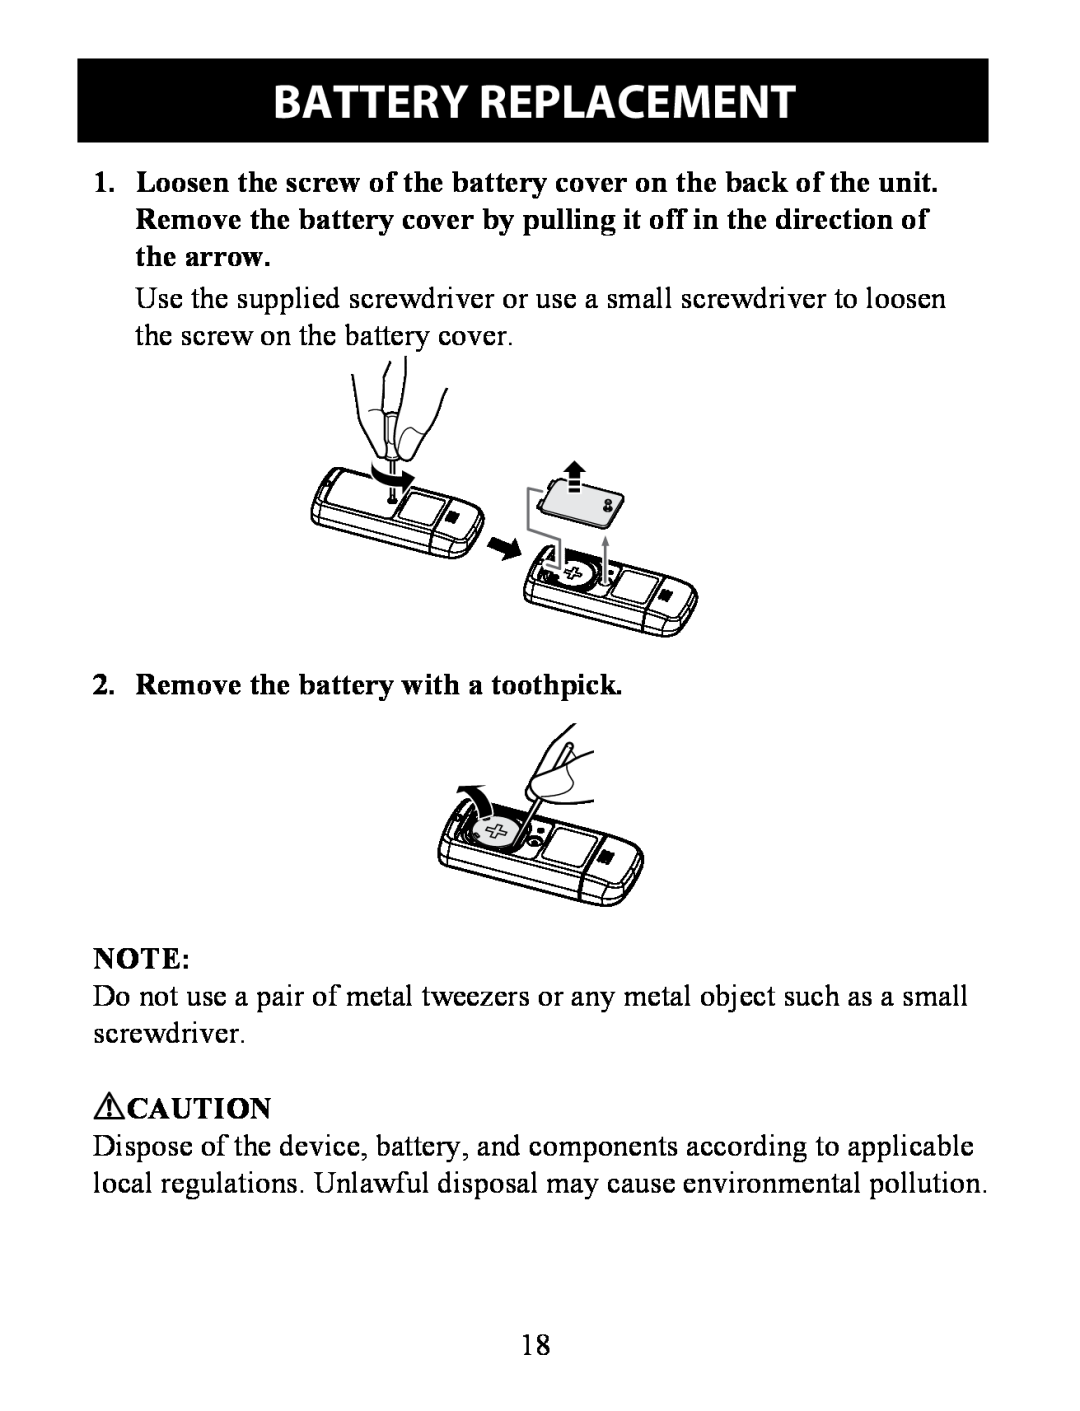 Omron HJ-324U instruction manual Battery Replacement, Remove the battery with a toothpick 